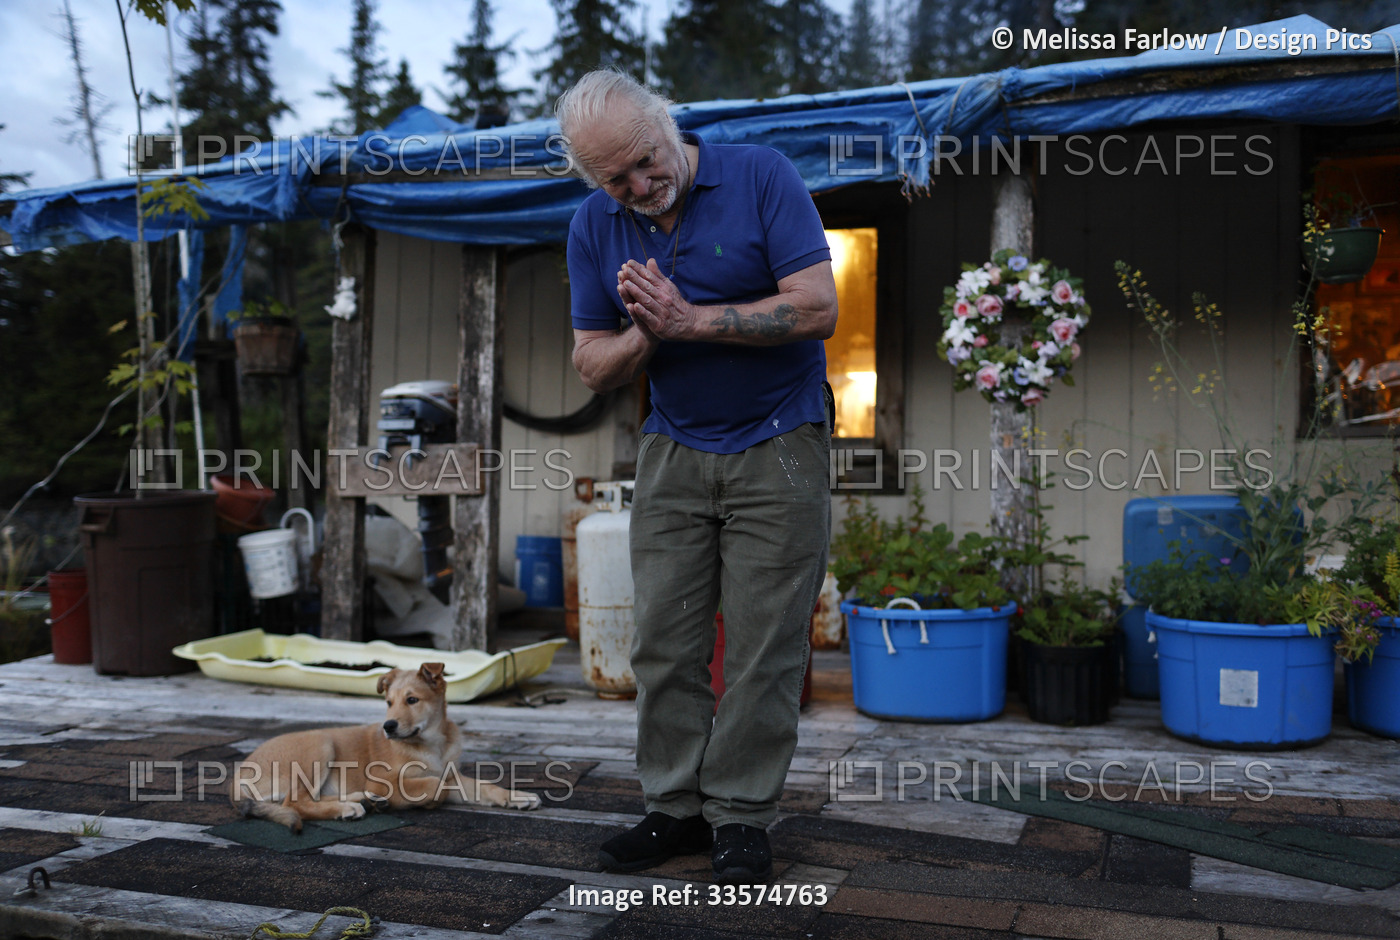 Swede, a float house owner, bows farewell to guests as they leave for the ...